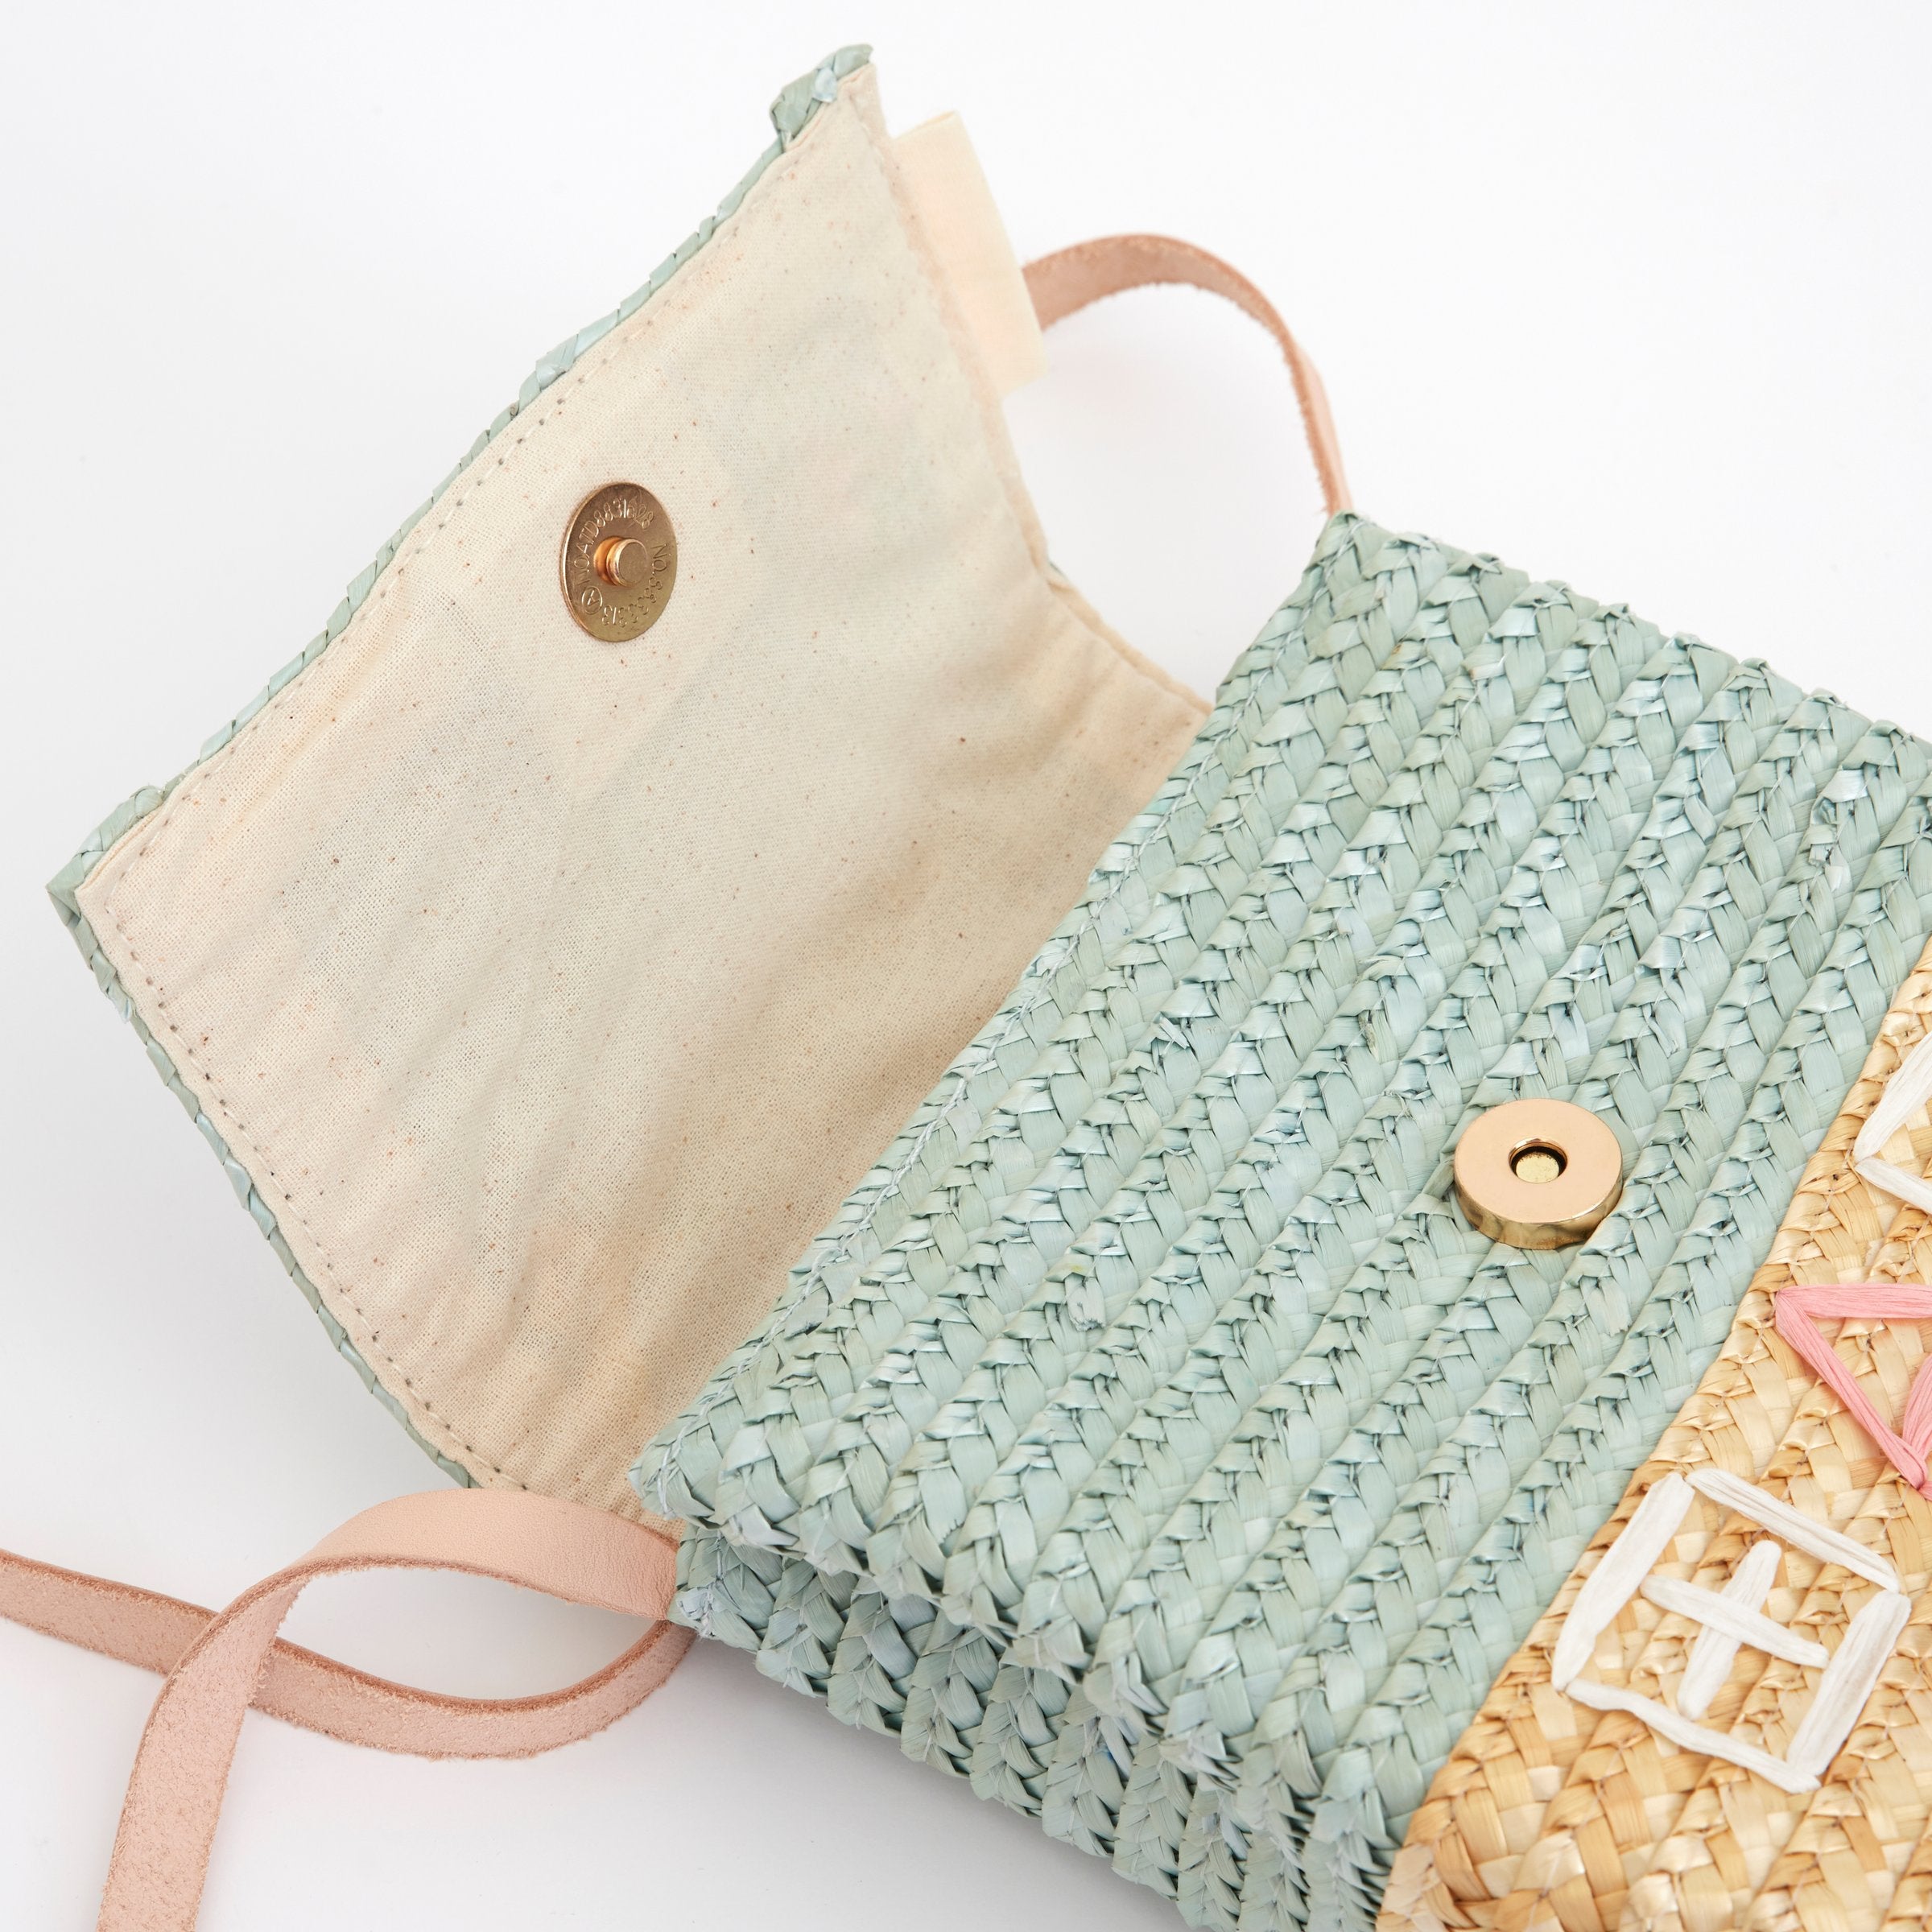 Our kids handbag, crafted from straw, is made to look like a pretty cottage.